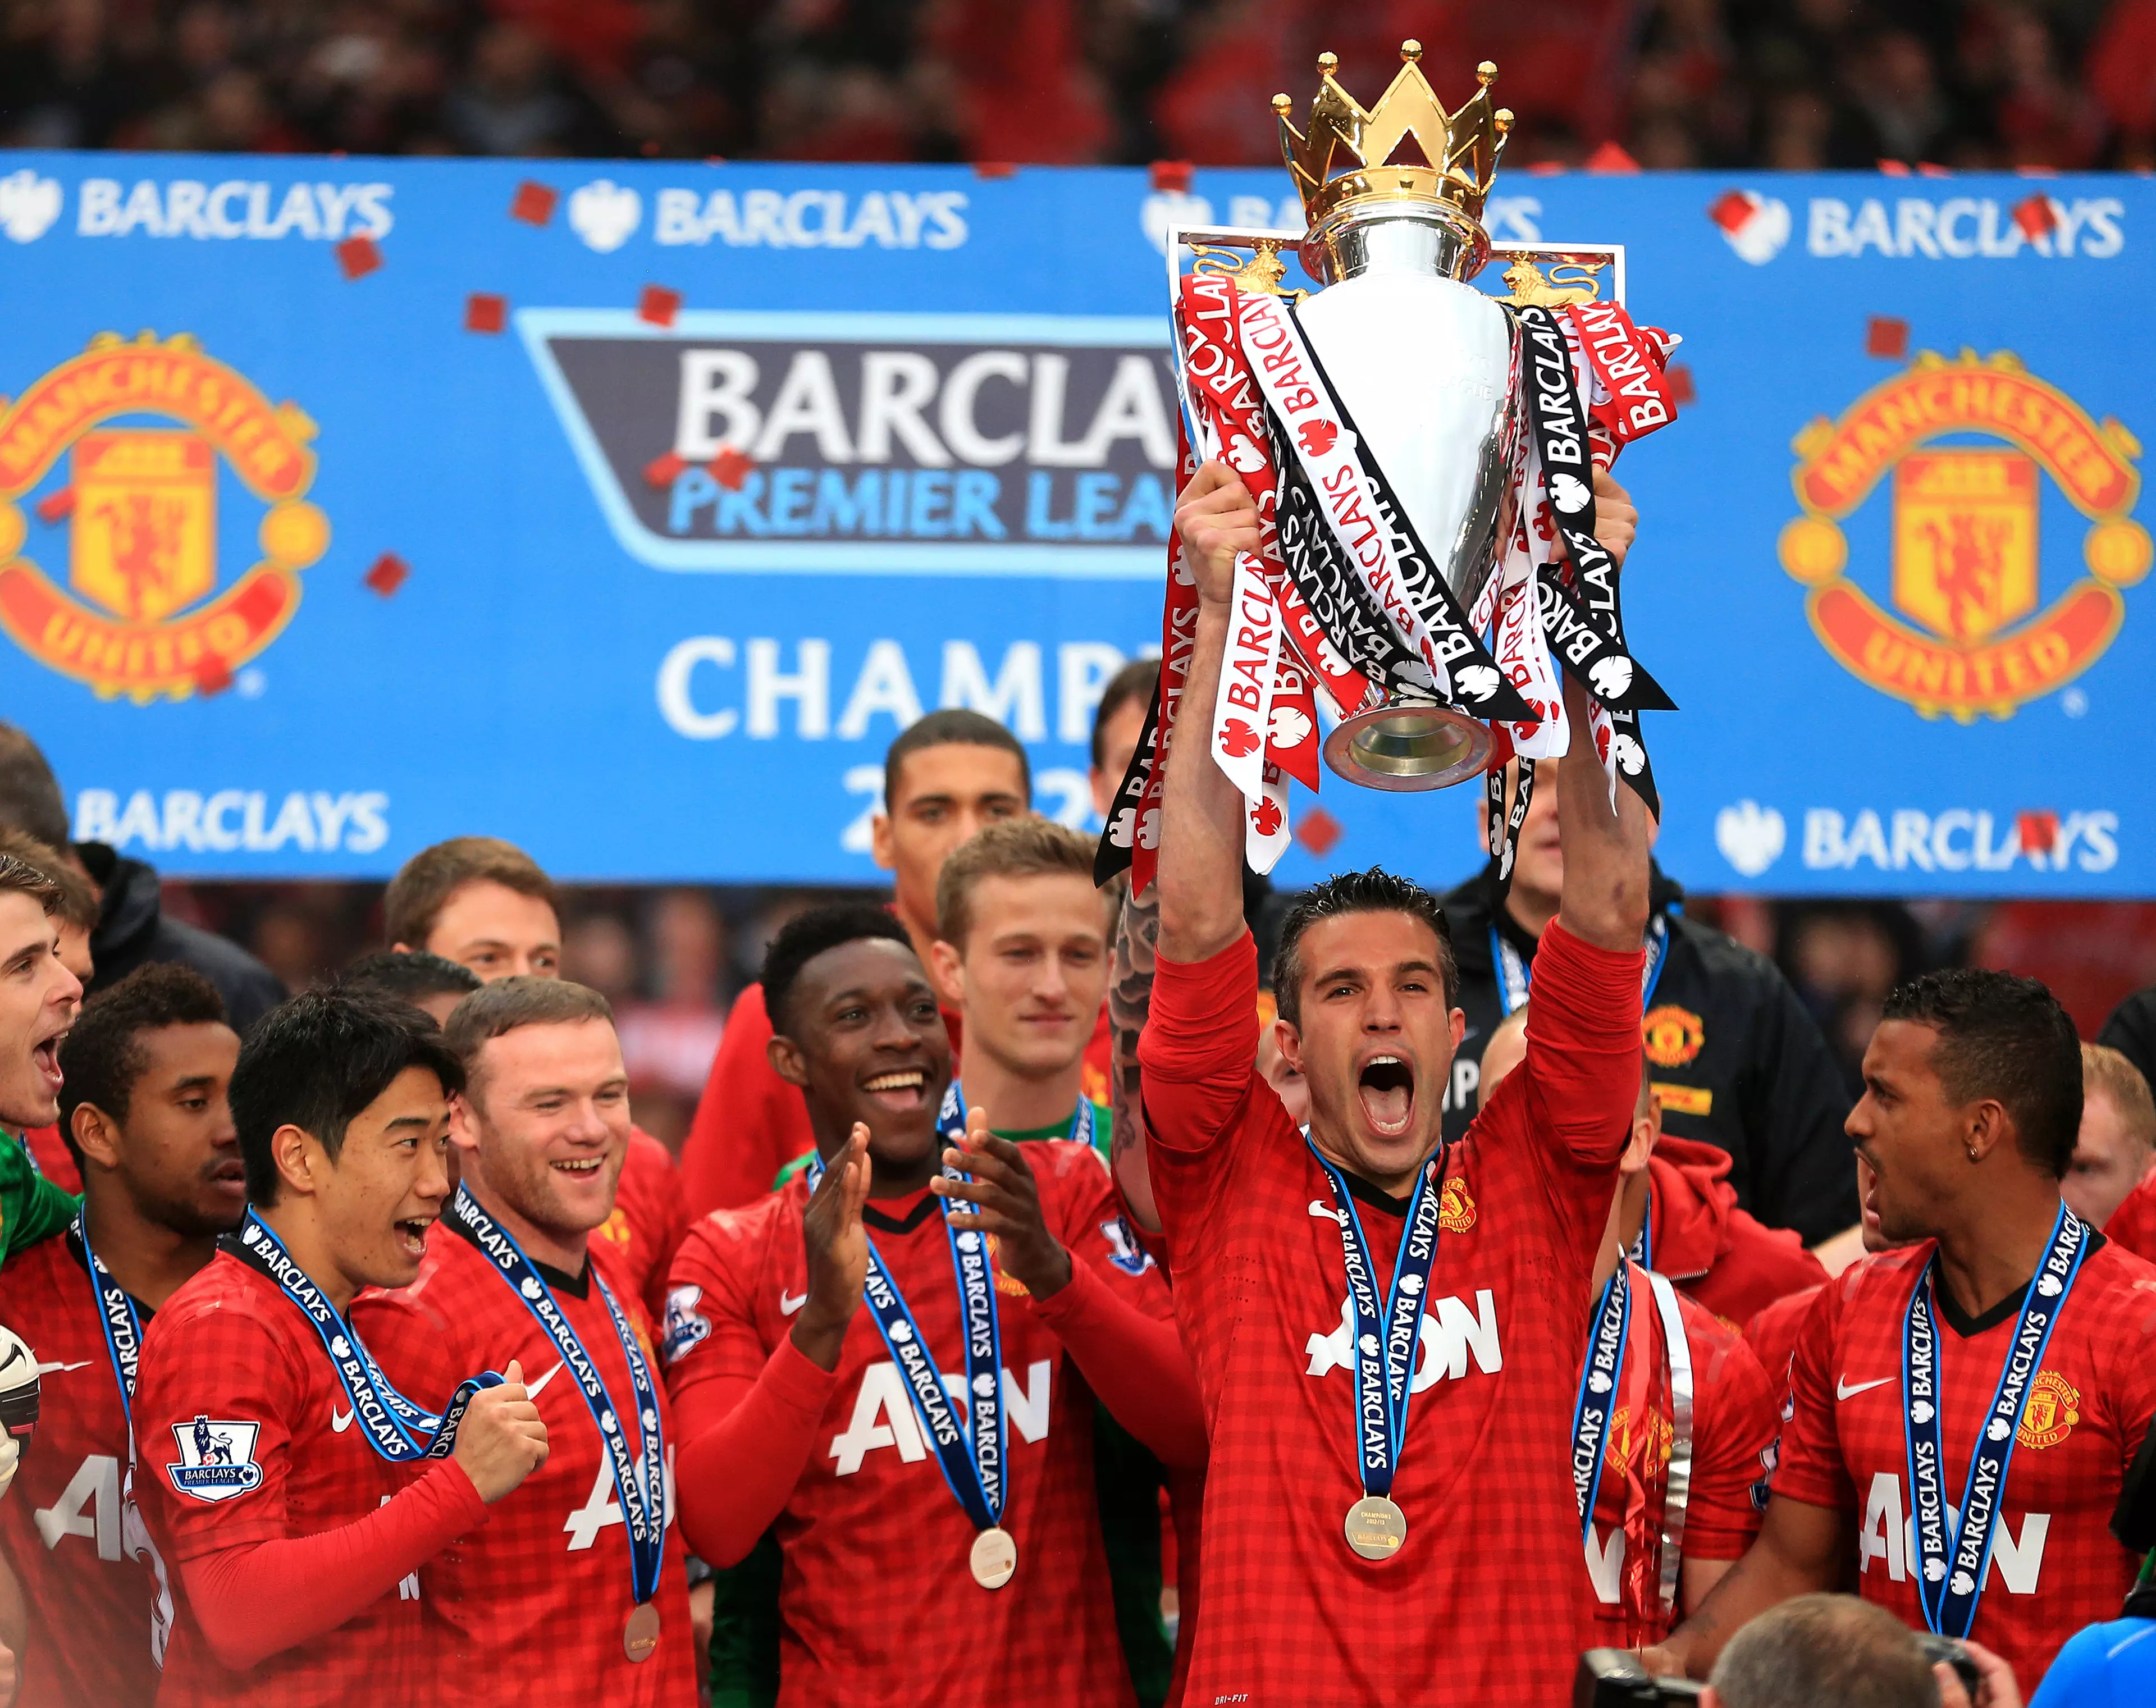 Van Persie won the title with United but not Arsenal. Image: PA Images